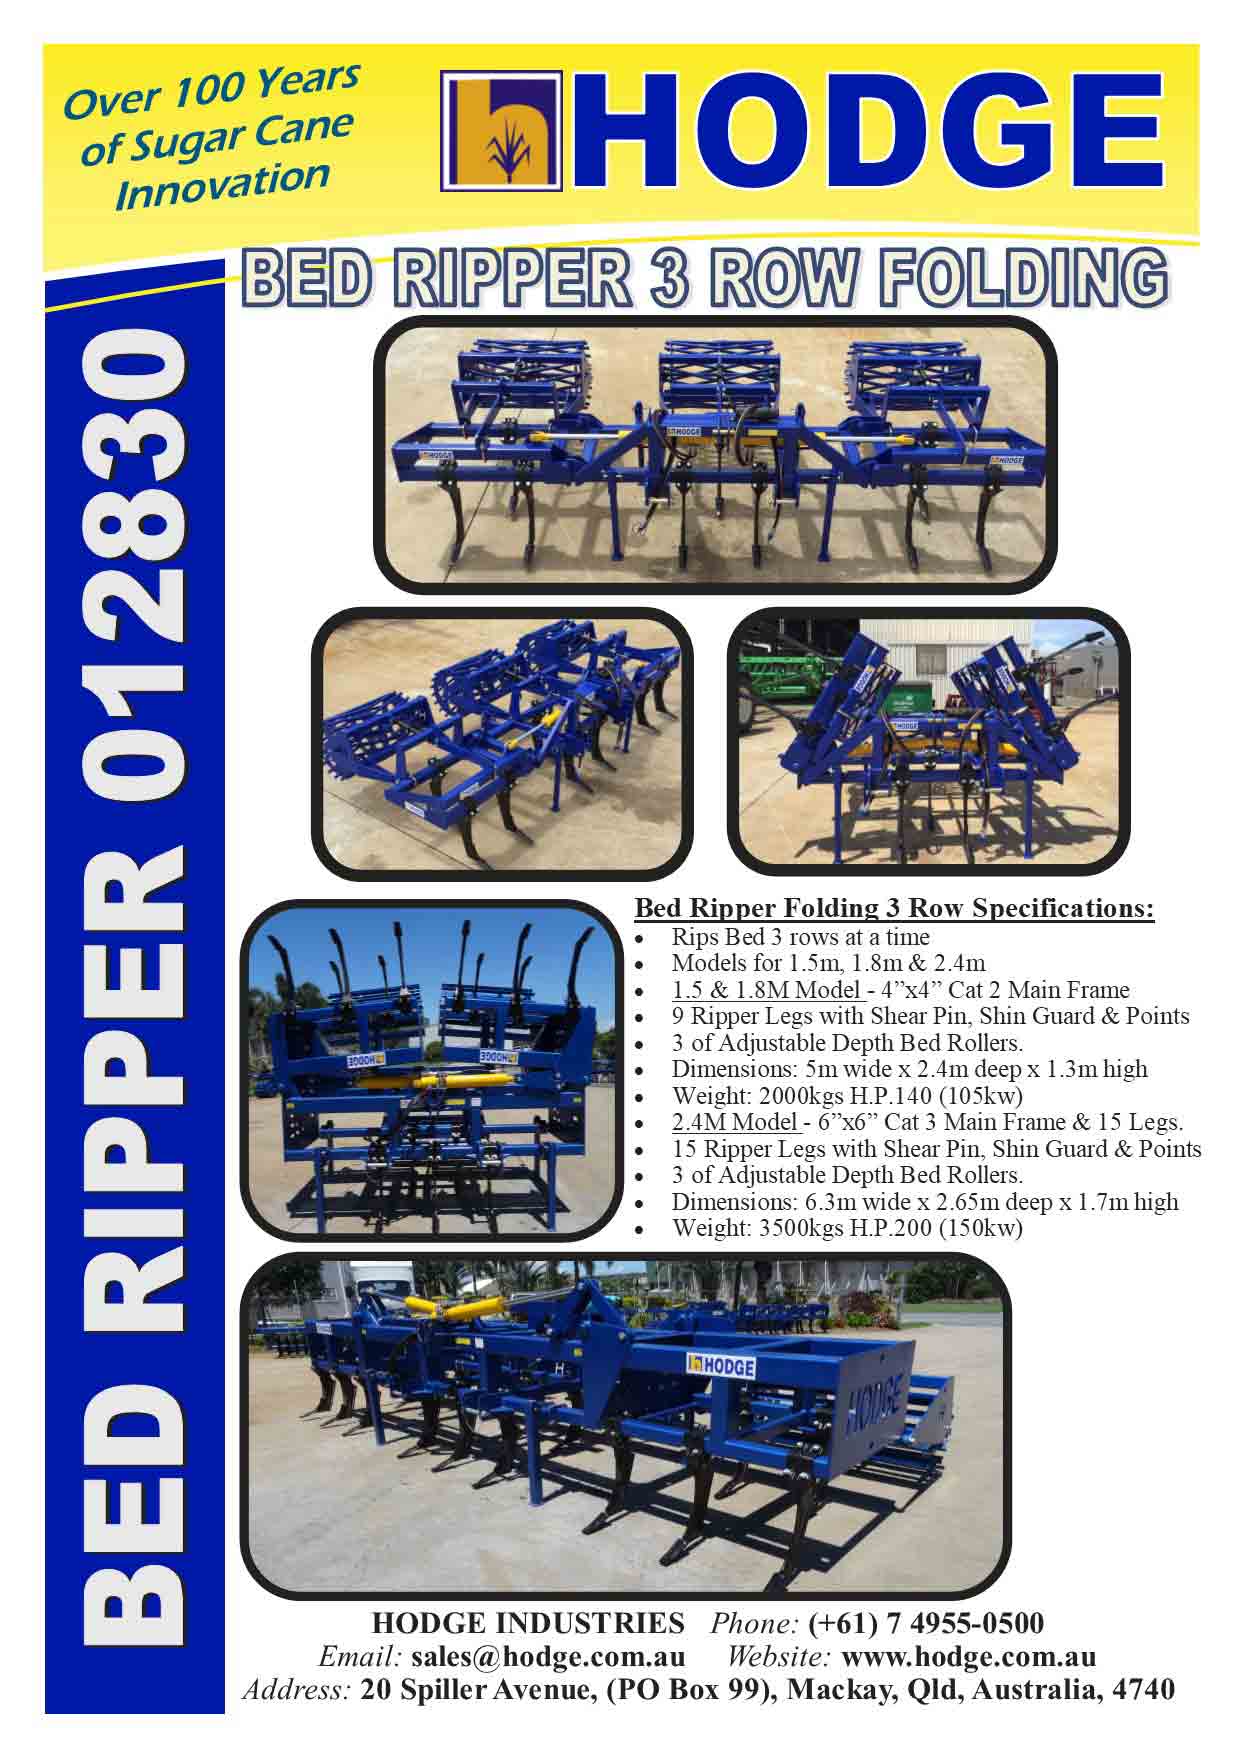 Bed-Ripper-Folding-3row--012830--Brochure — Hodge Industries in Mackay Harbour, QLD